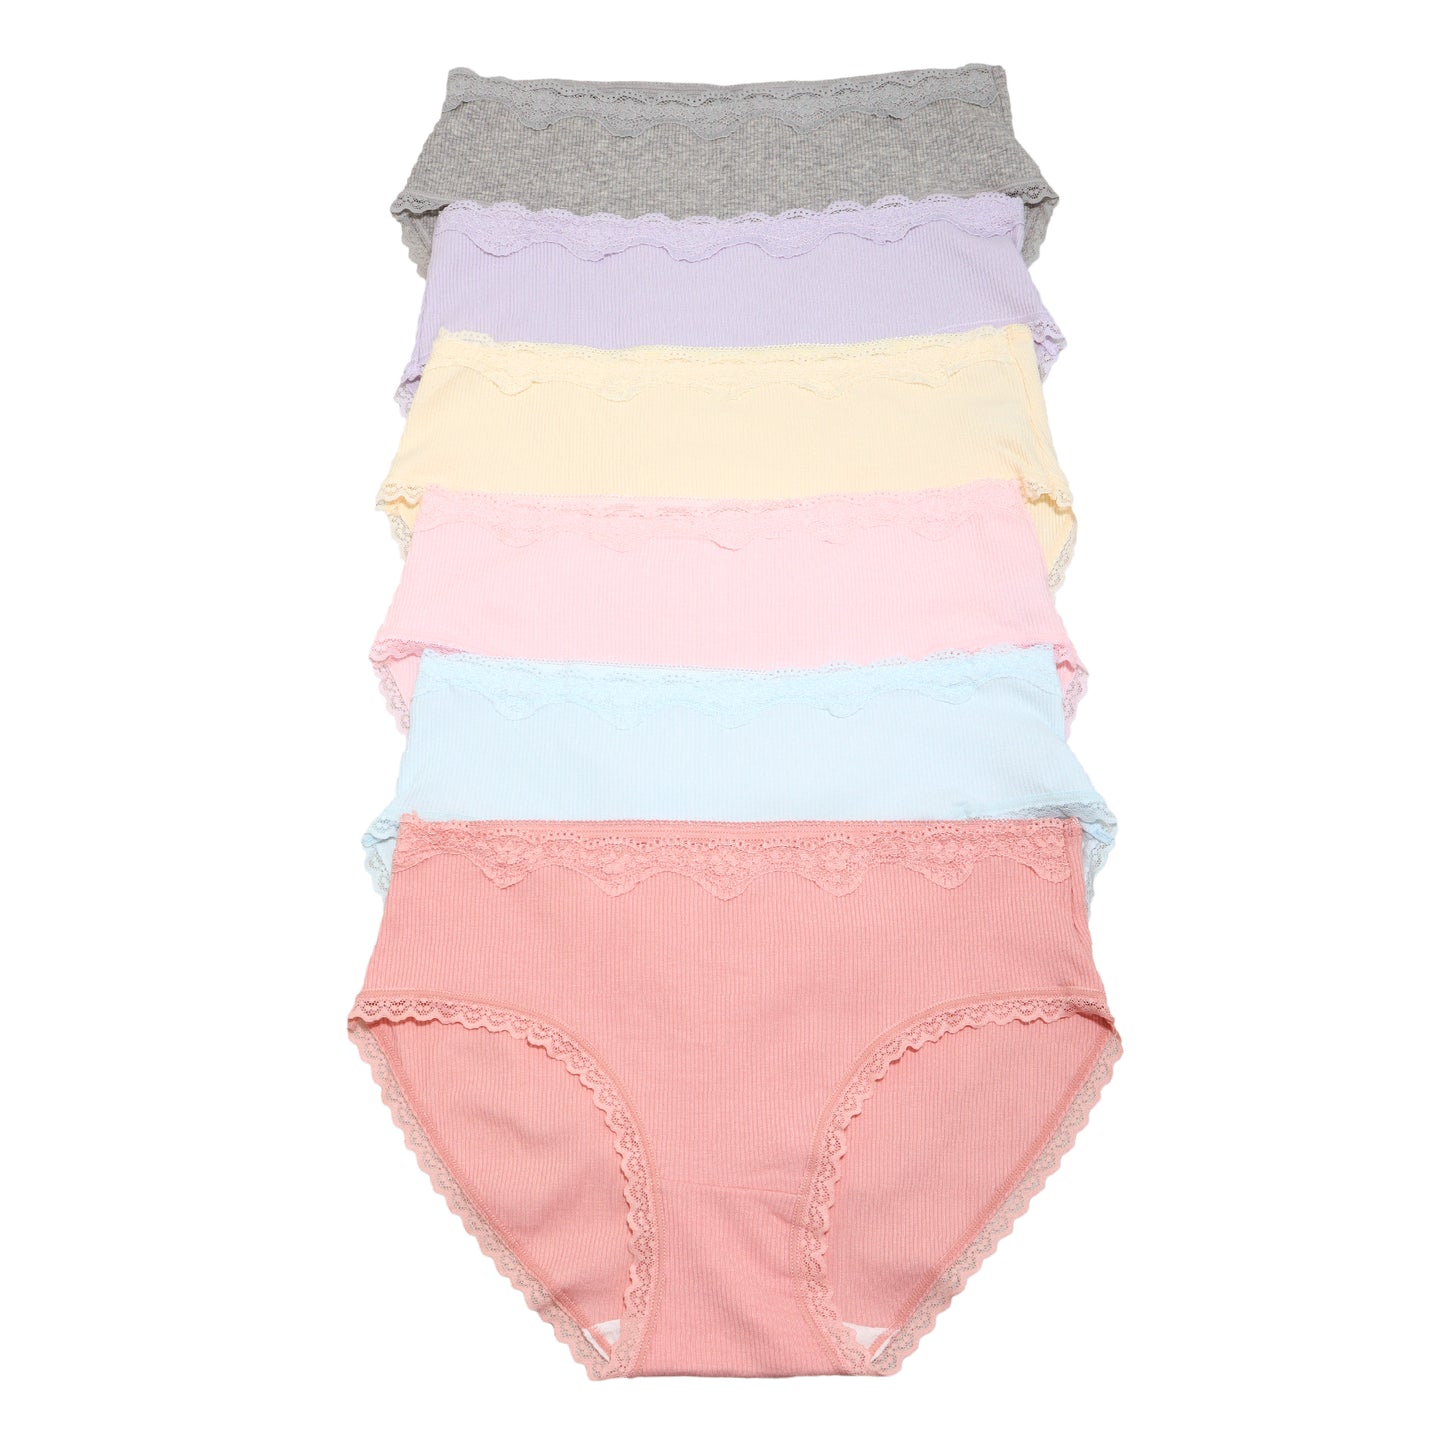 Cotton Hiphugger Panties with Flower Lace Accent (6-Pack)